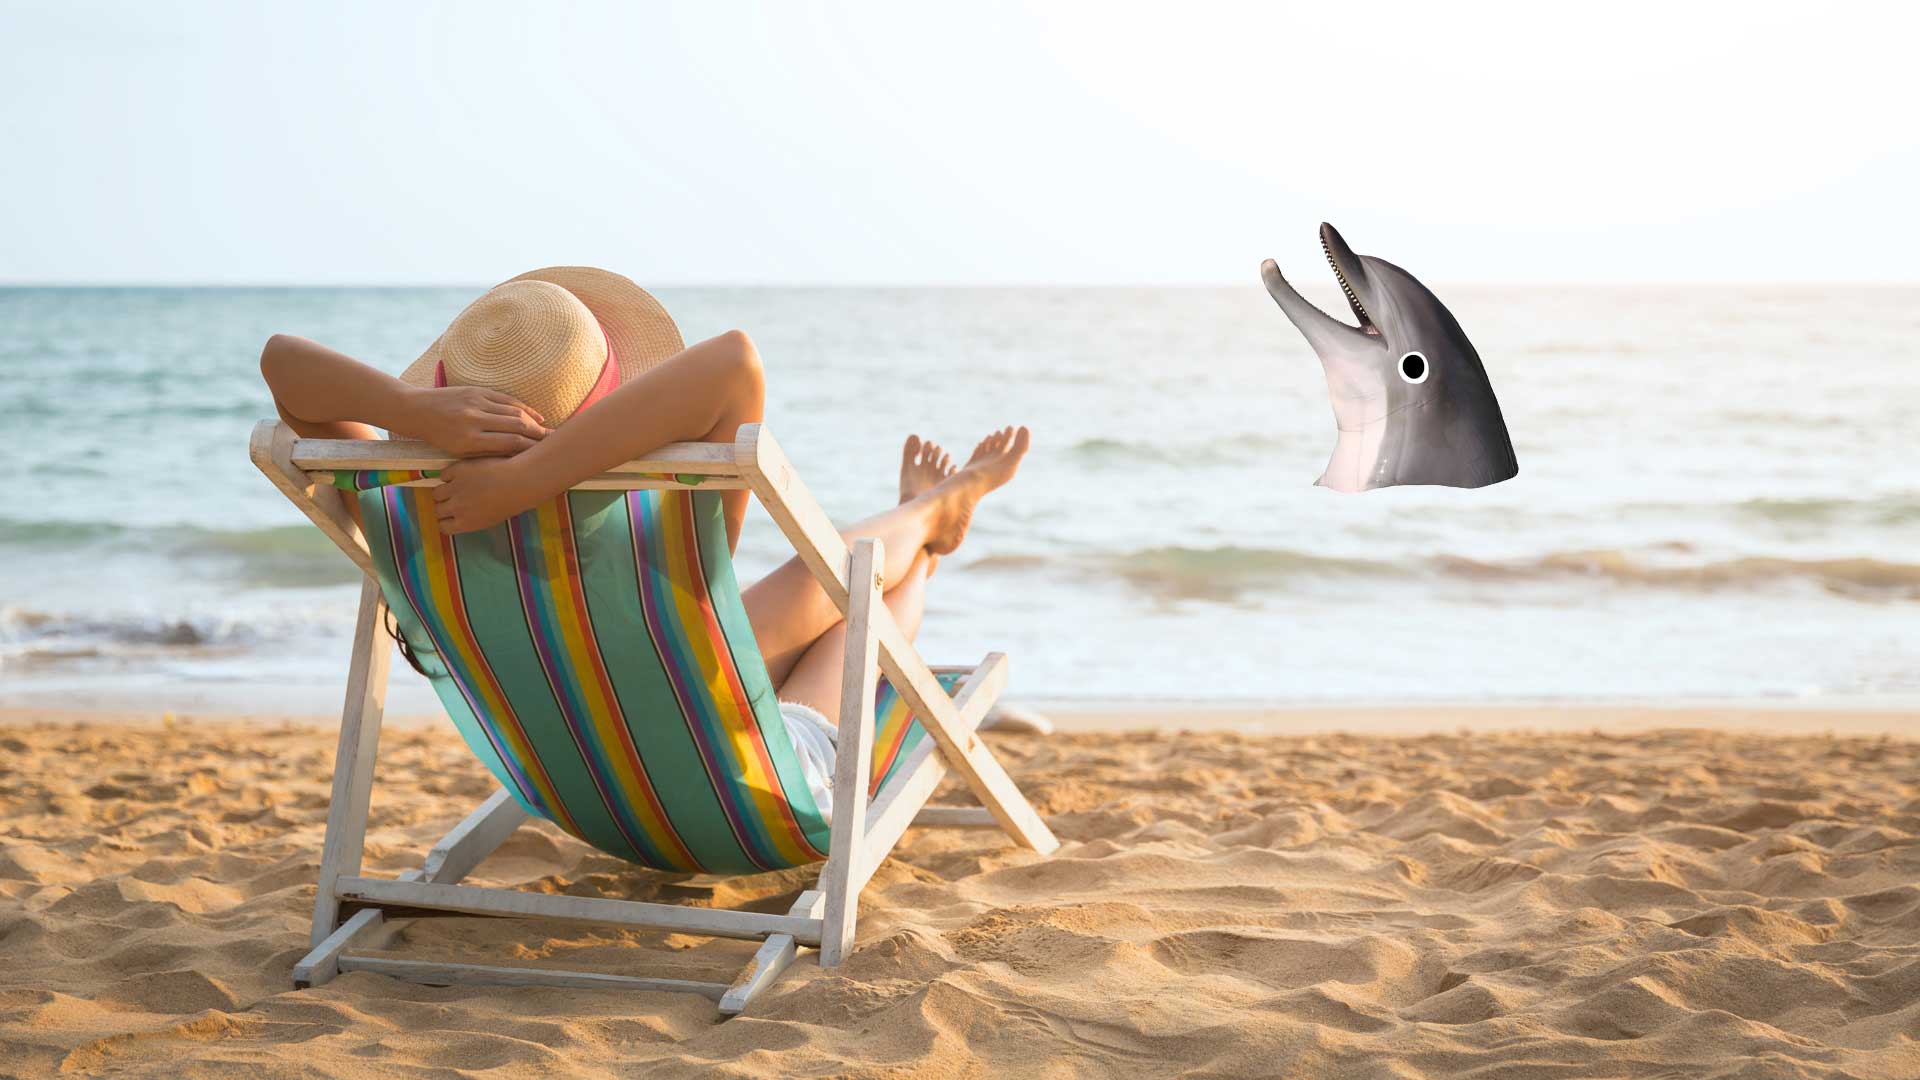 A person relaxing on a beach with a dolphin in the background